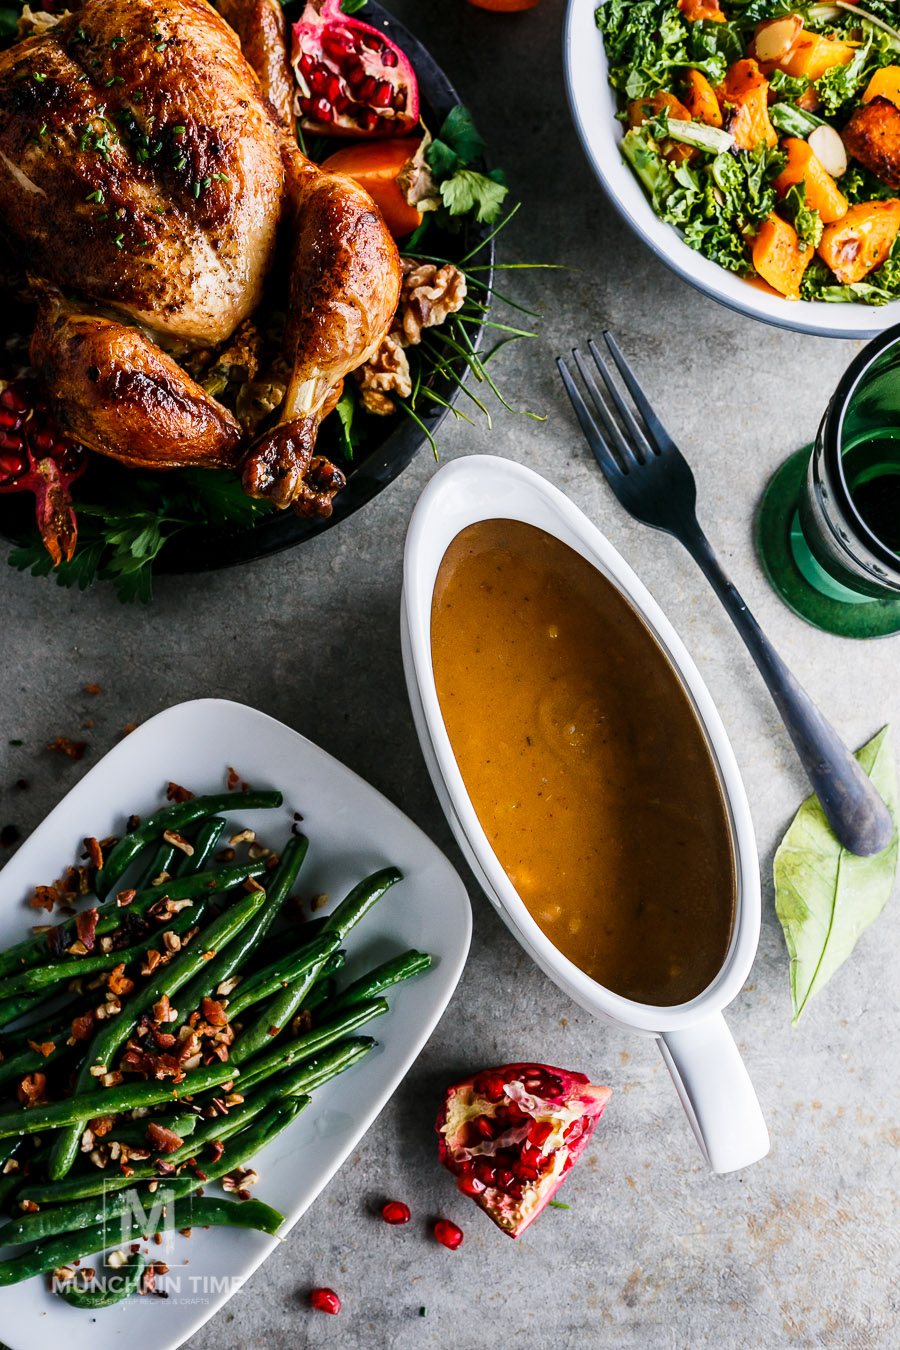 2017 Thanksgiving Dinner Ideas - here are 7 delicious Thanksgiving dishes that you can bring to the table this holiday season. 